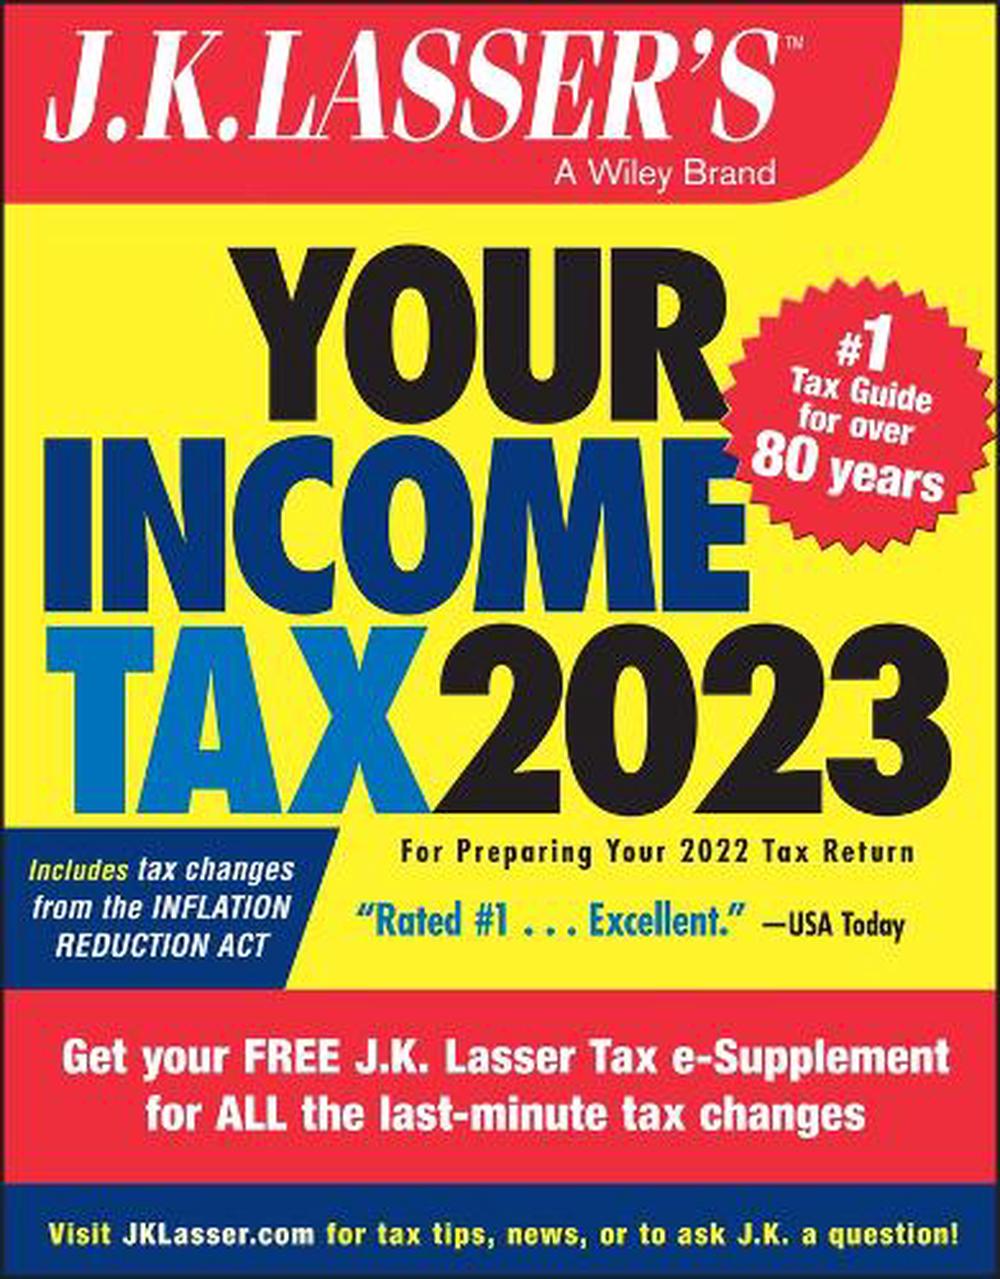 j-k-lasser-s-your-income-tax-2023-for-preparing-your-2022-tax-return